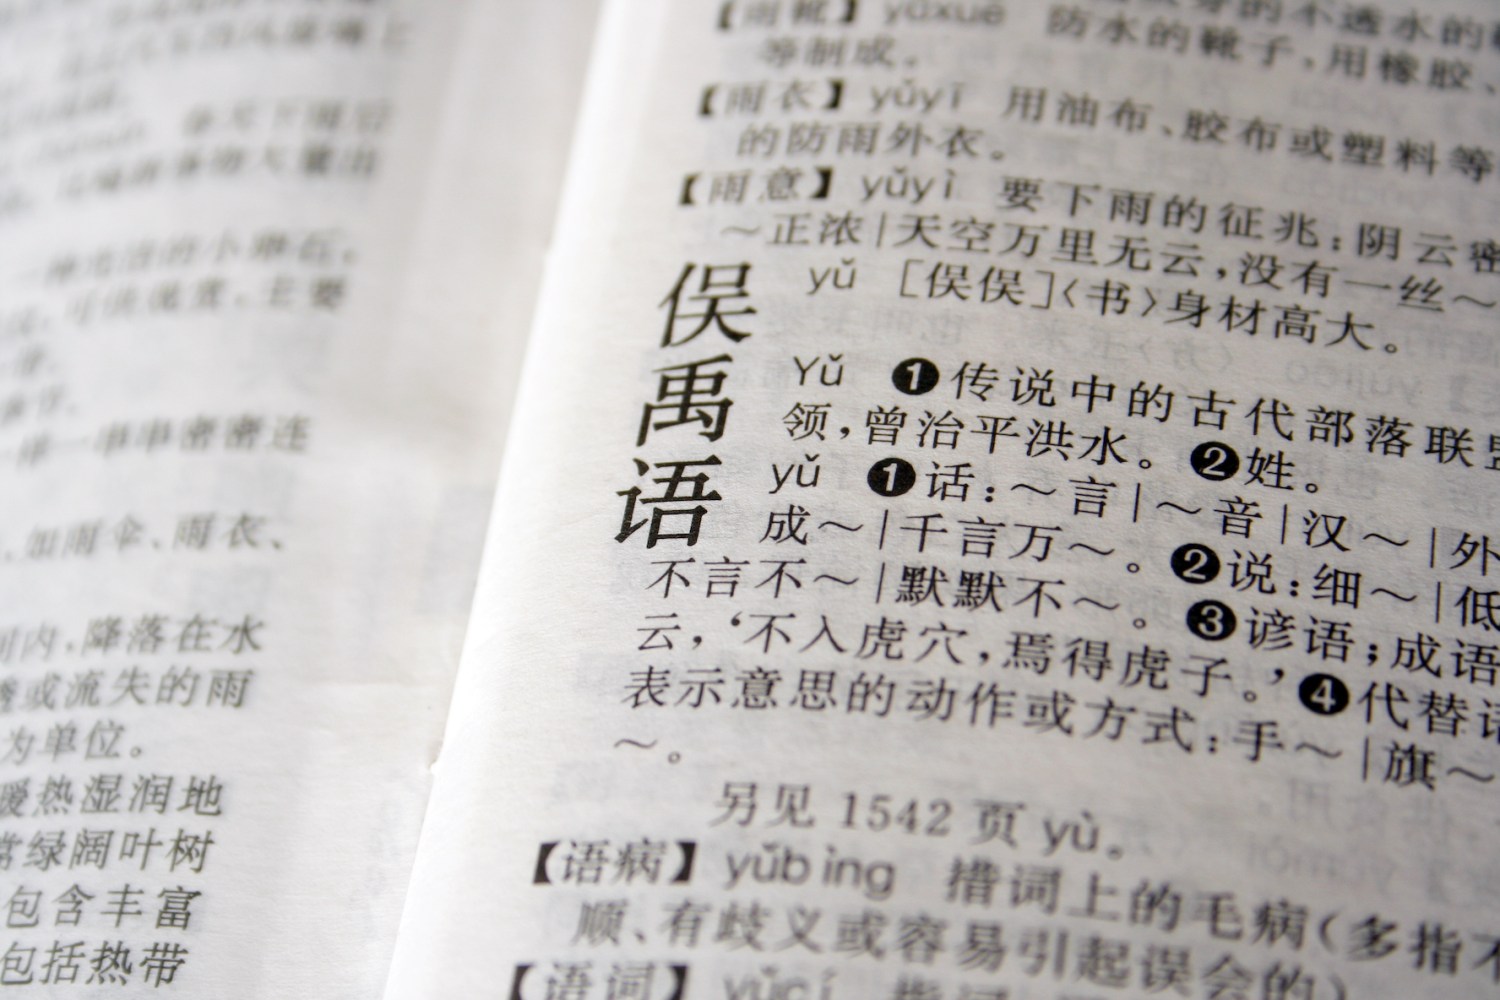 "Language" in Chinese with character dictionary.